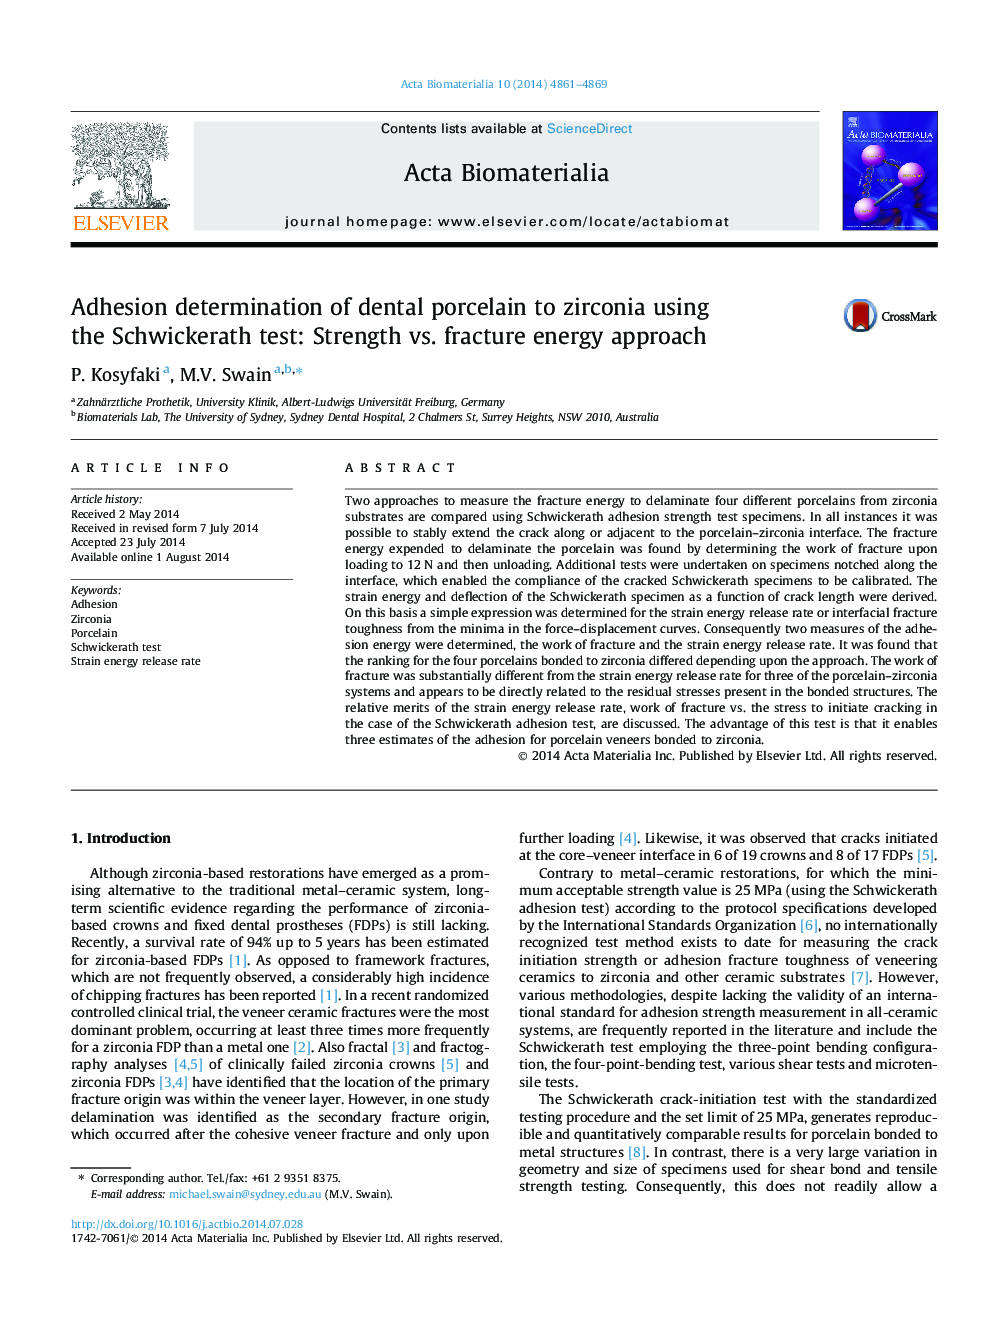 Adhesion determination of dental porcelain to zirconia using the Schwickerath test: Strength vs. fracture energy approach